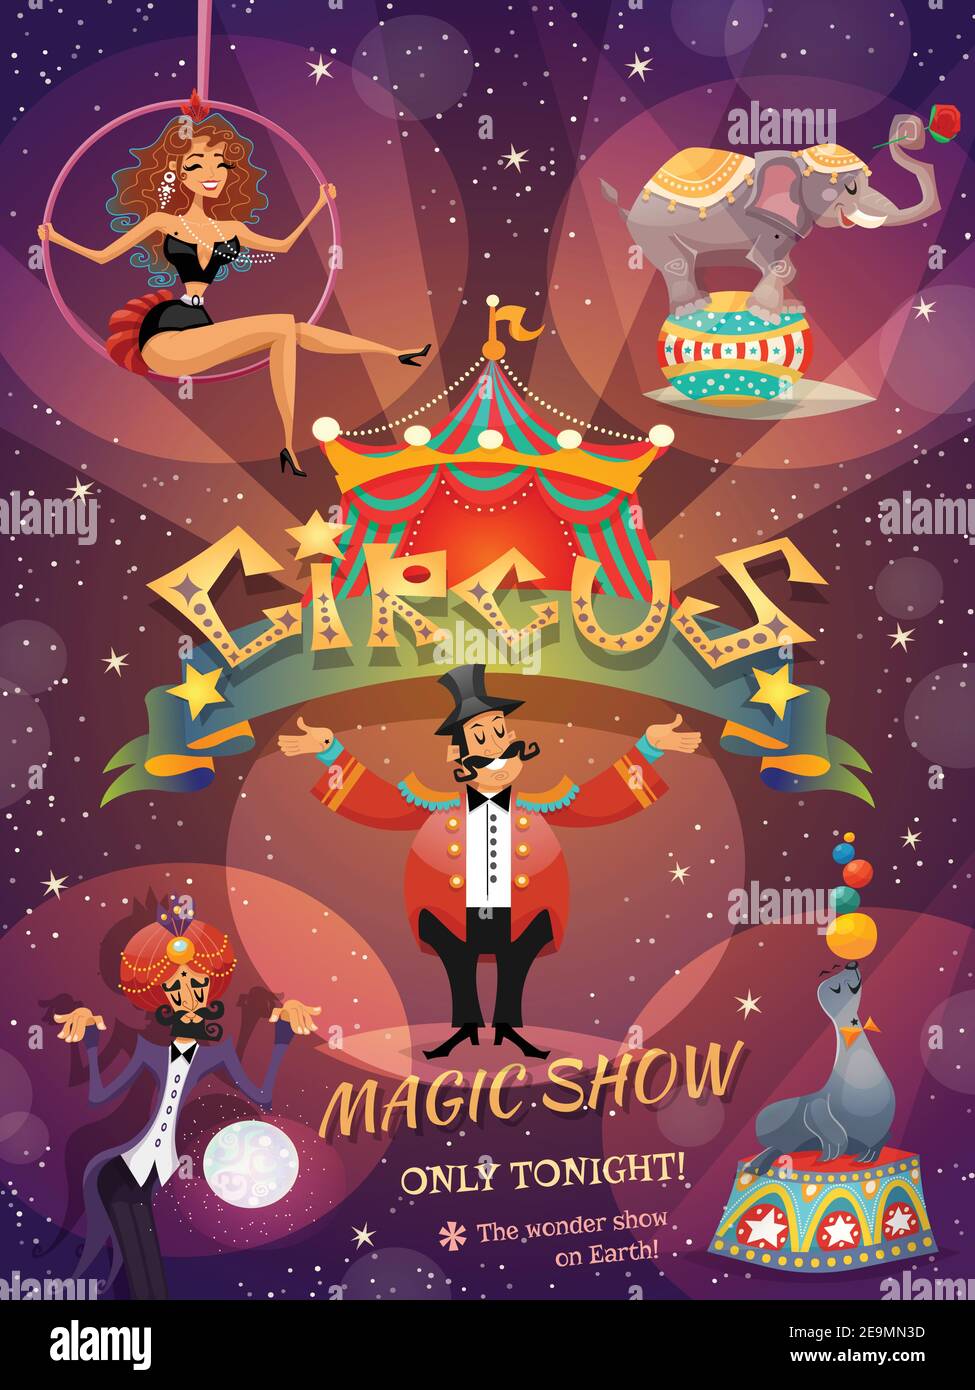 Circus show poster with acrobat animals and magician vector illustration Stock Vector